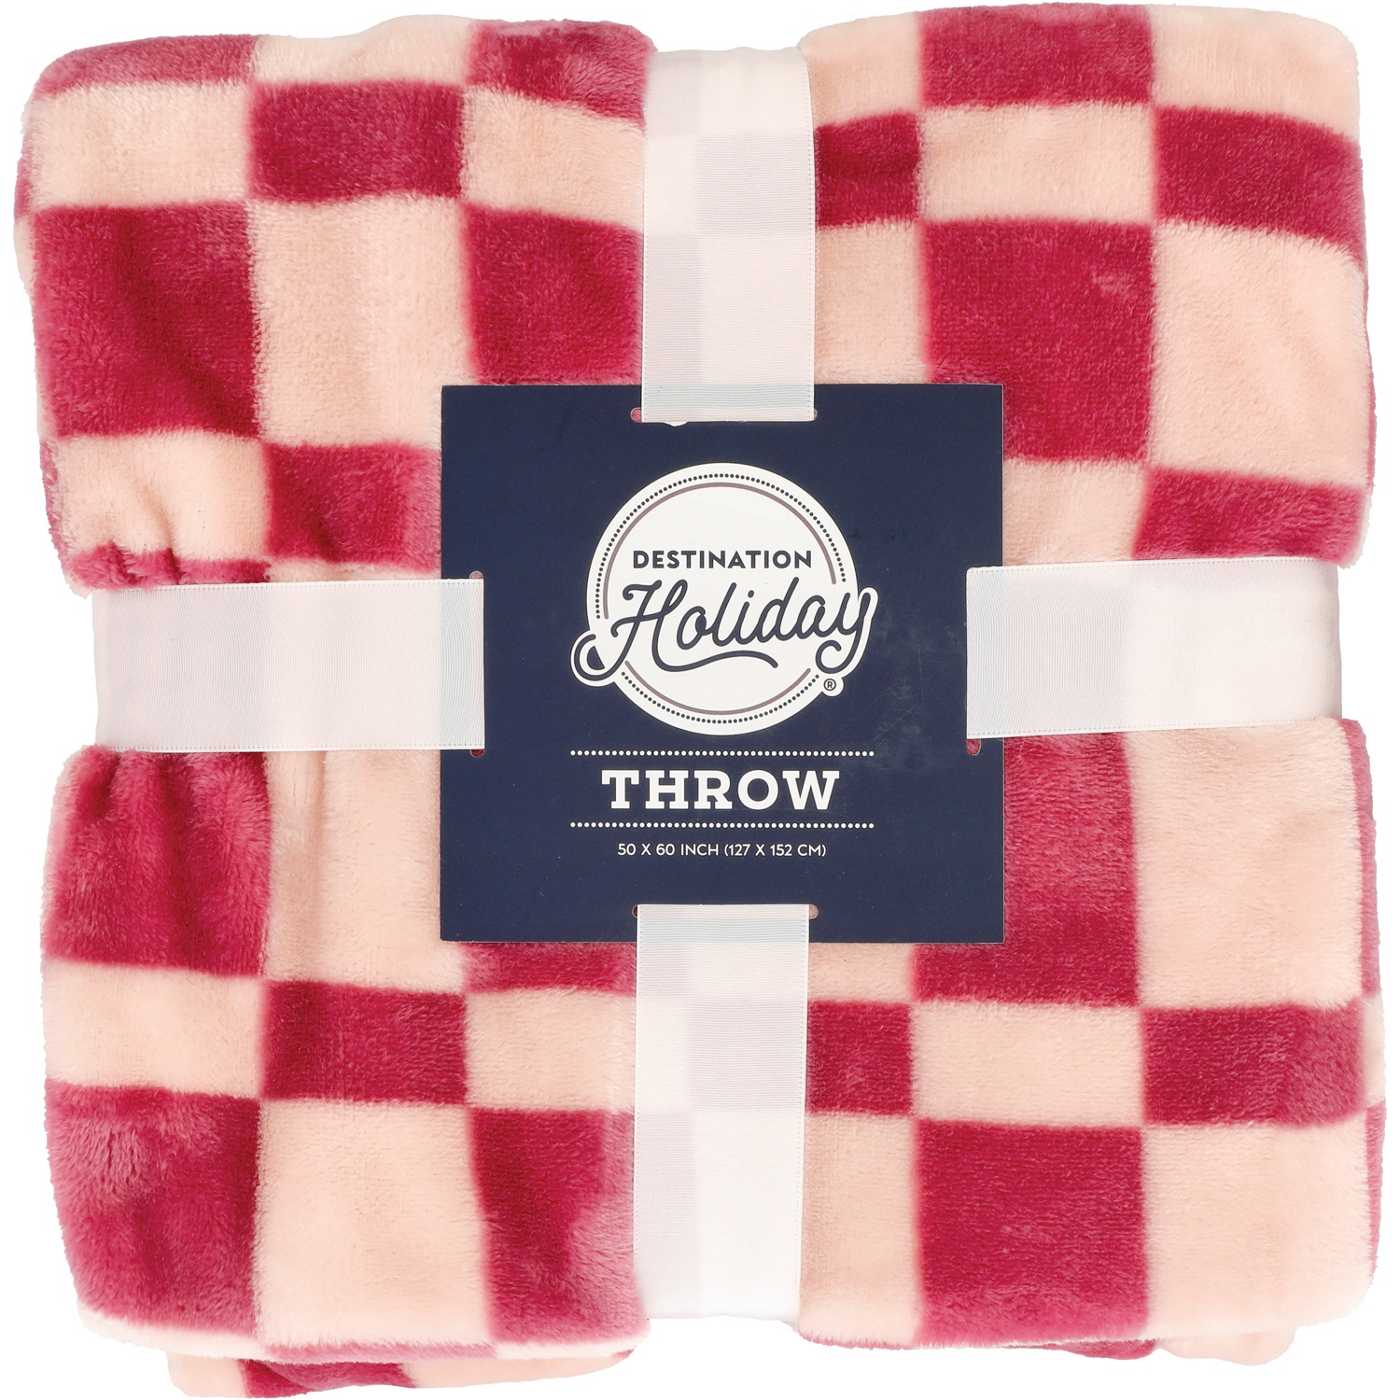 Destination Holiday Throw Blanket - Pink; image 1 of 3